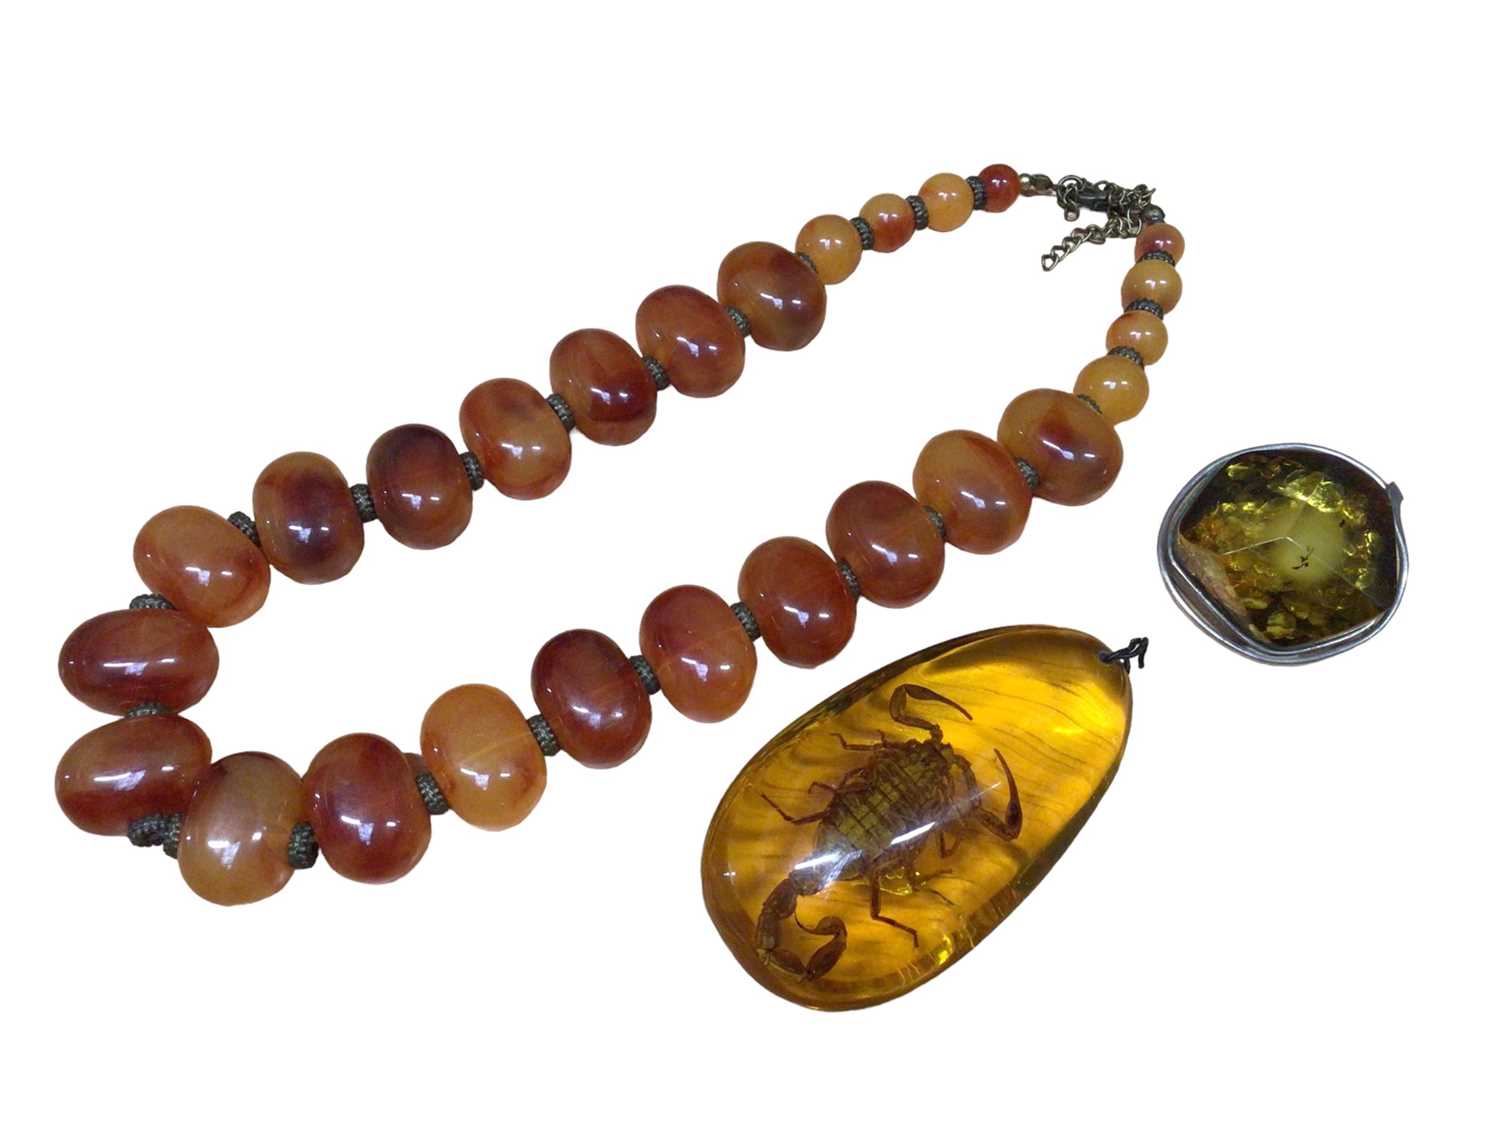 Lot 112 - Large reconstituted amber pendant with a scorpion inside, reconstituted amber brooch in white metal mount and a plastic bead necklace